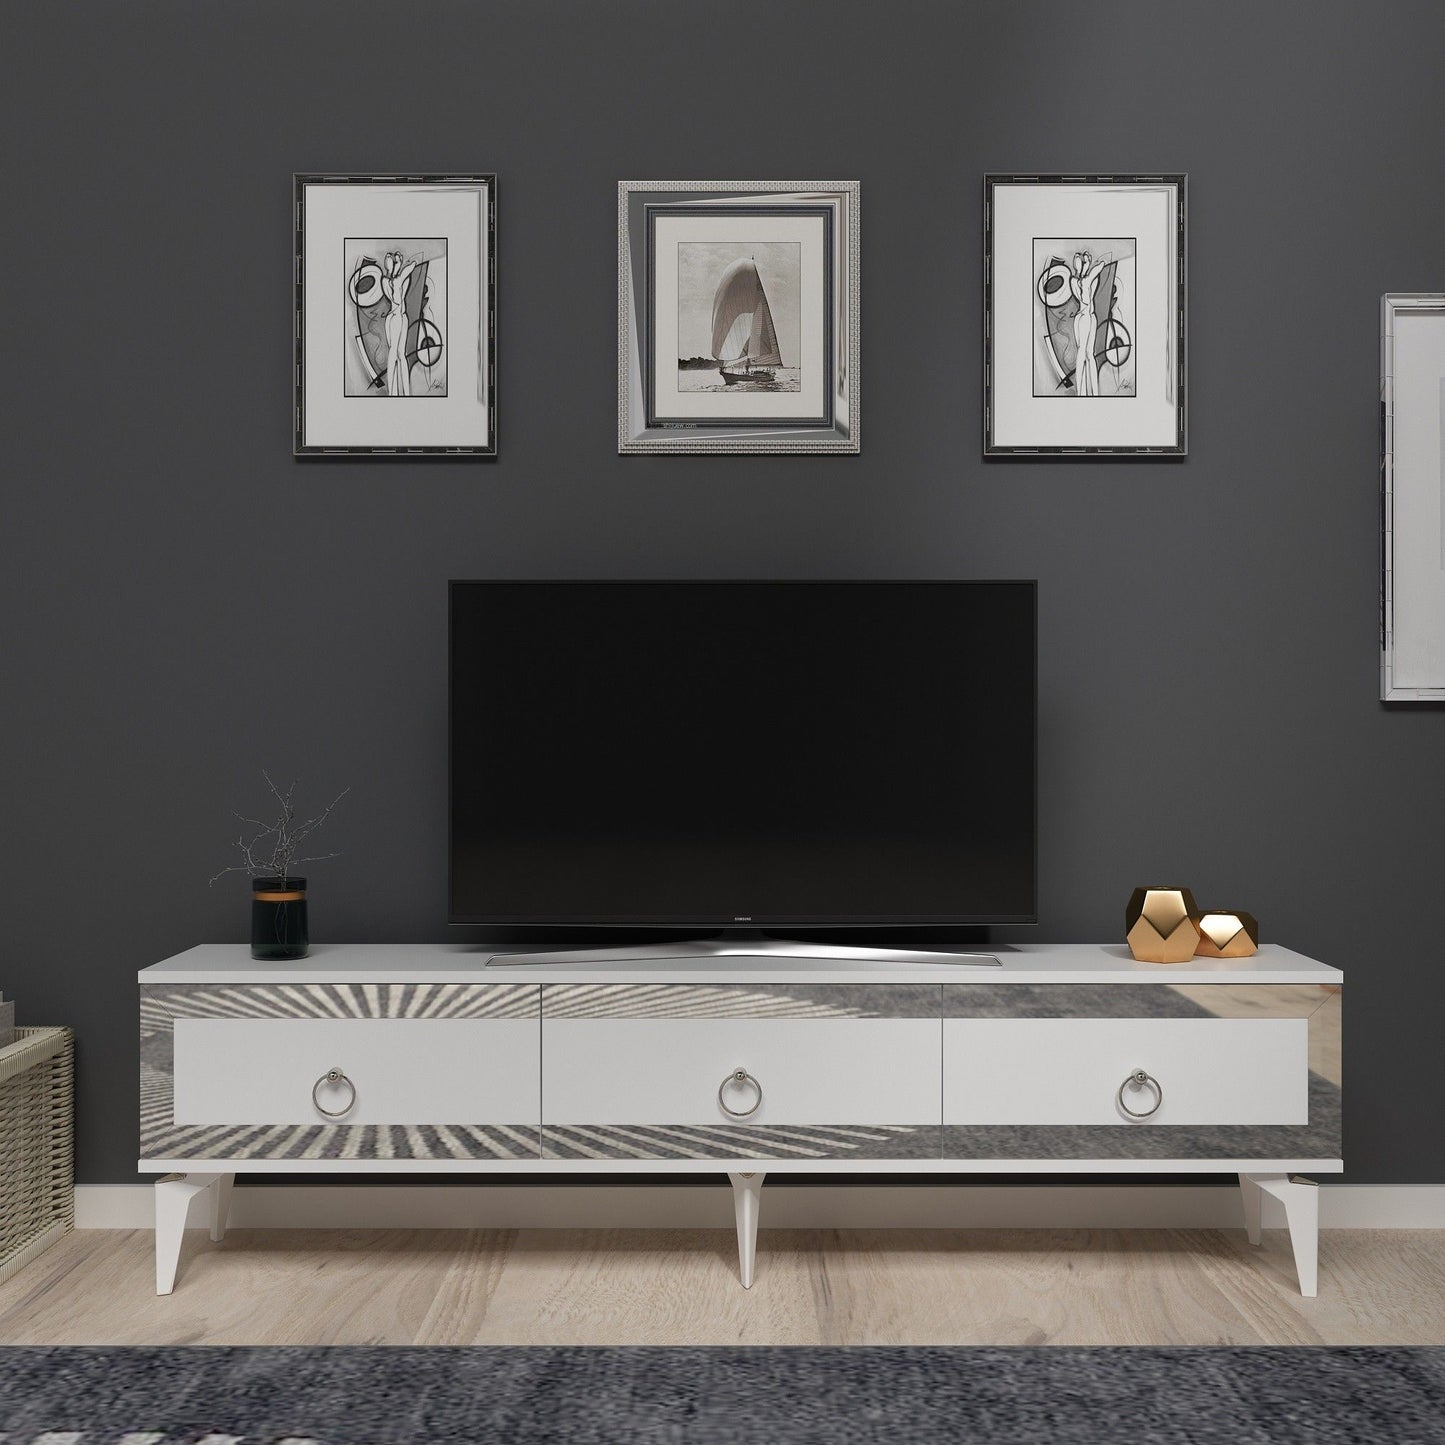 Ponny - White, Silver - TV Stand